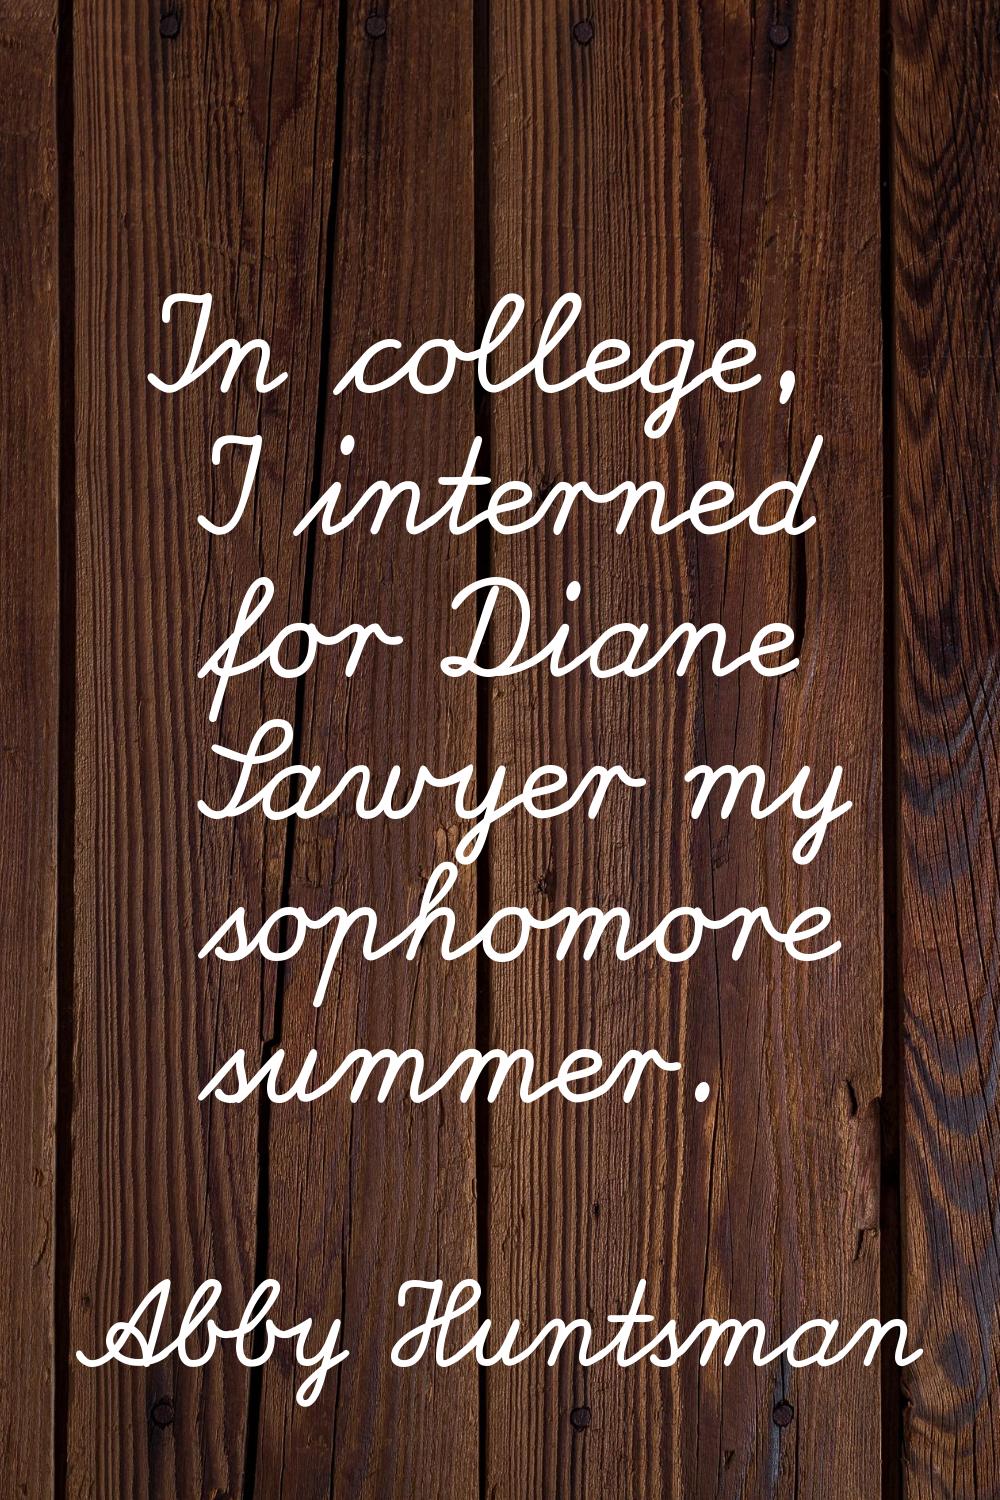 In college, I interned for Diane Sawyer my sophomore summer.